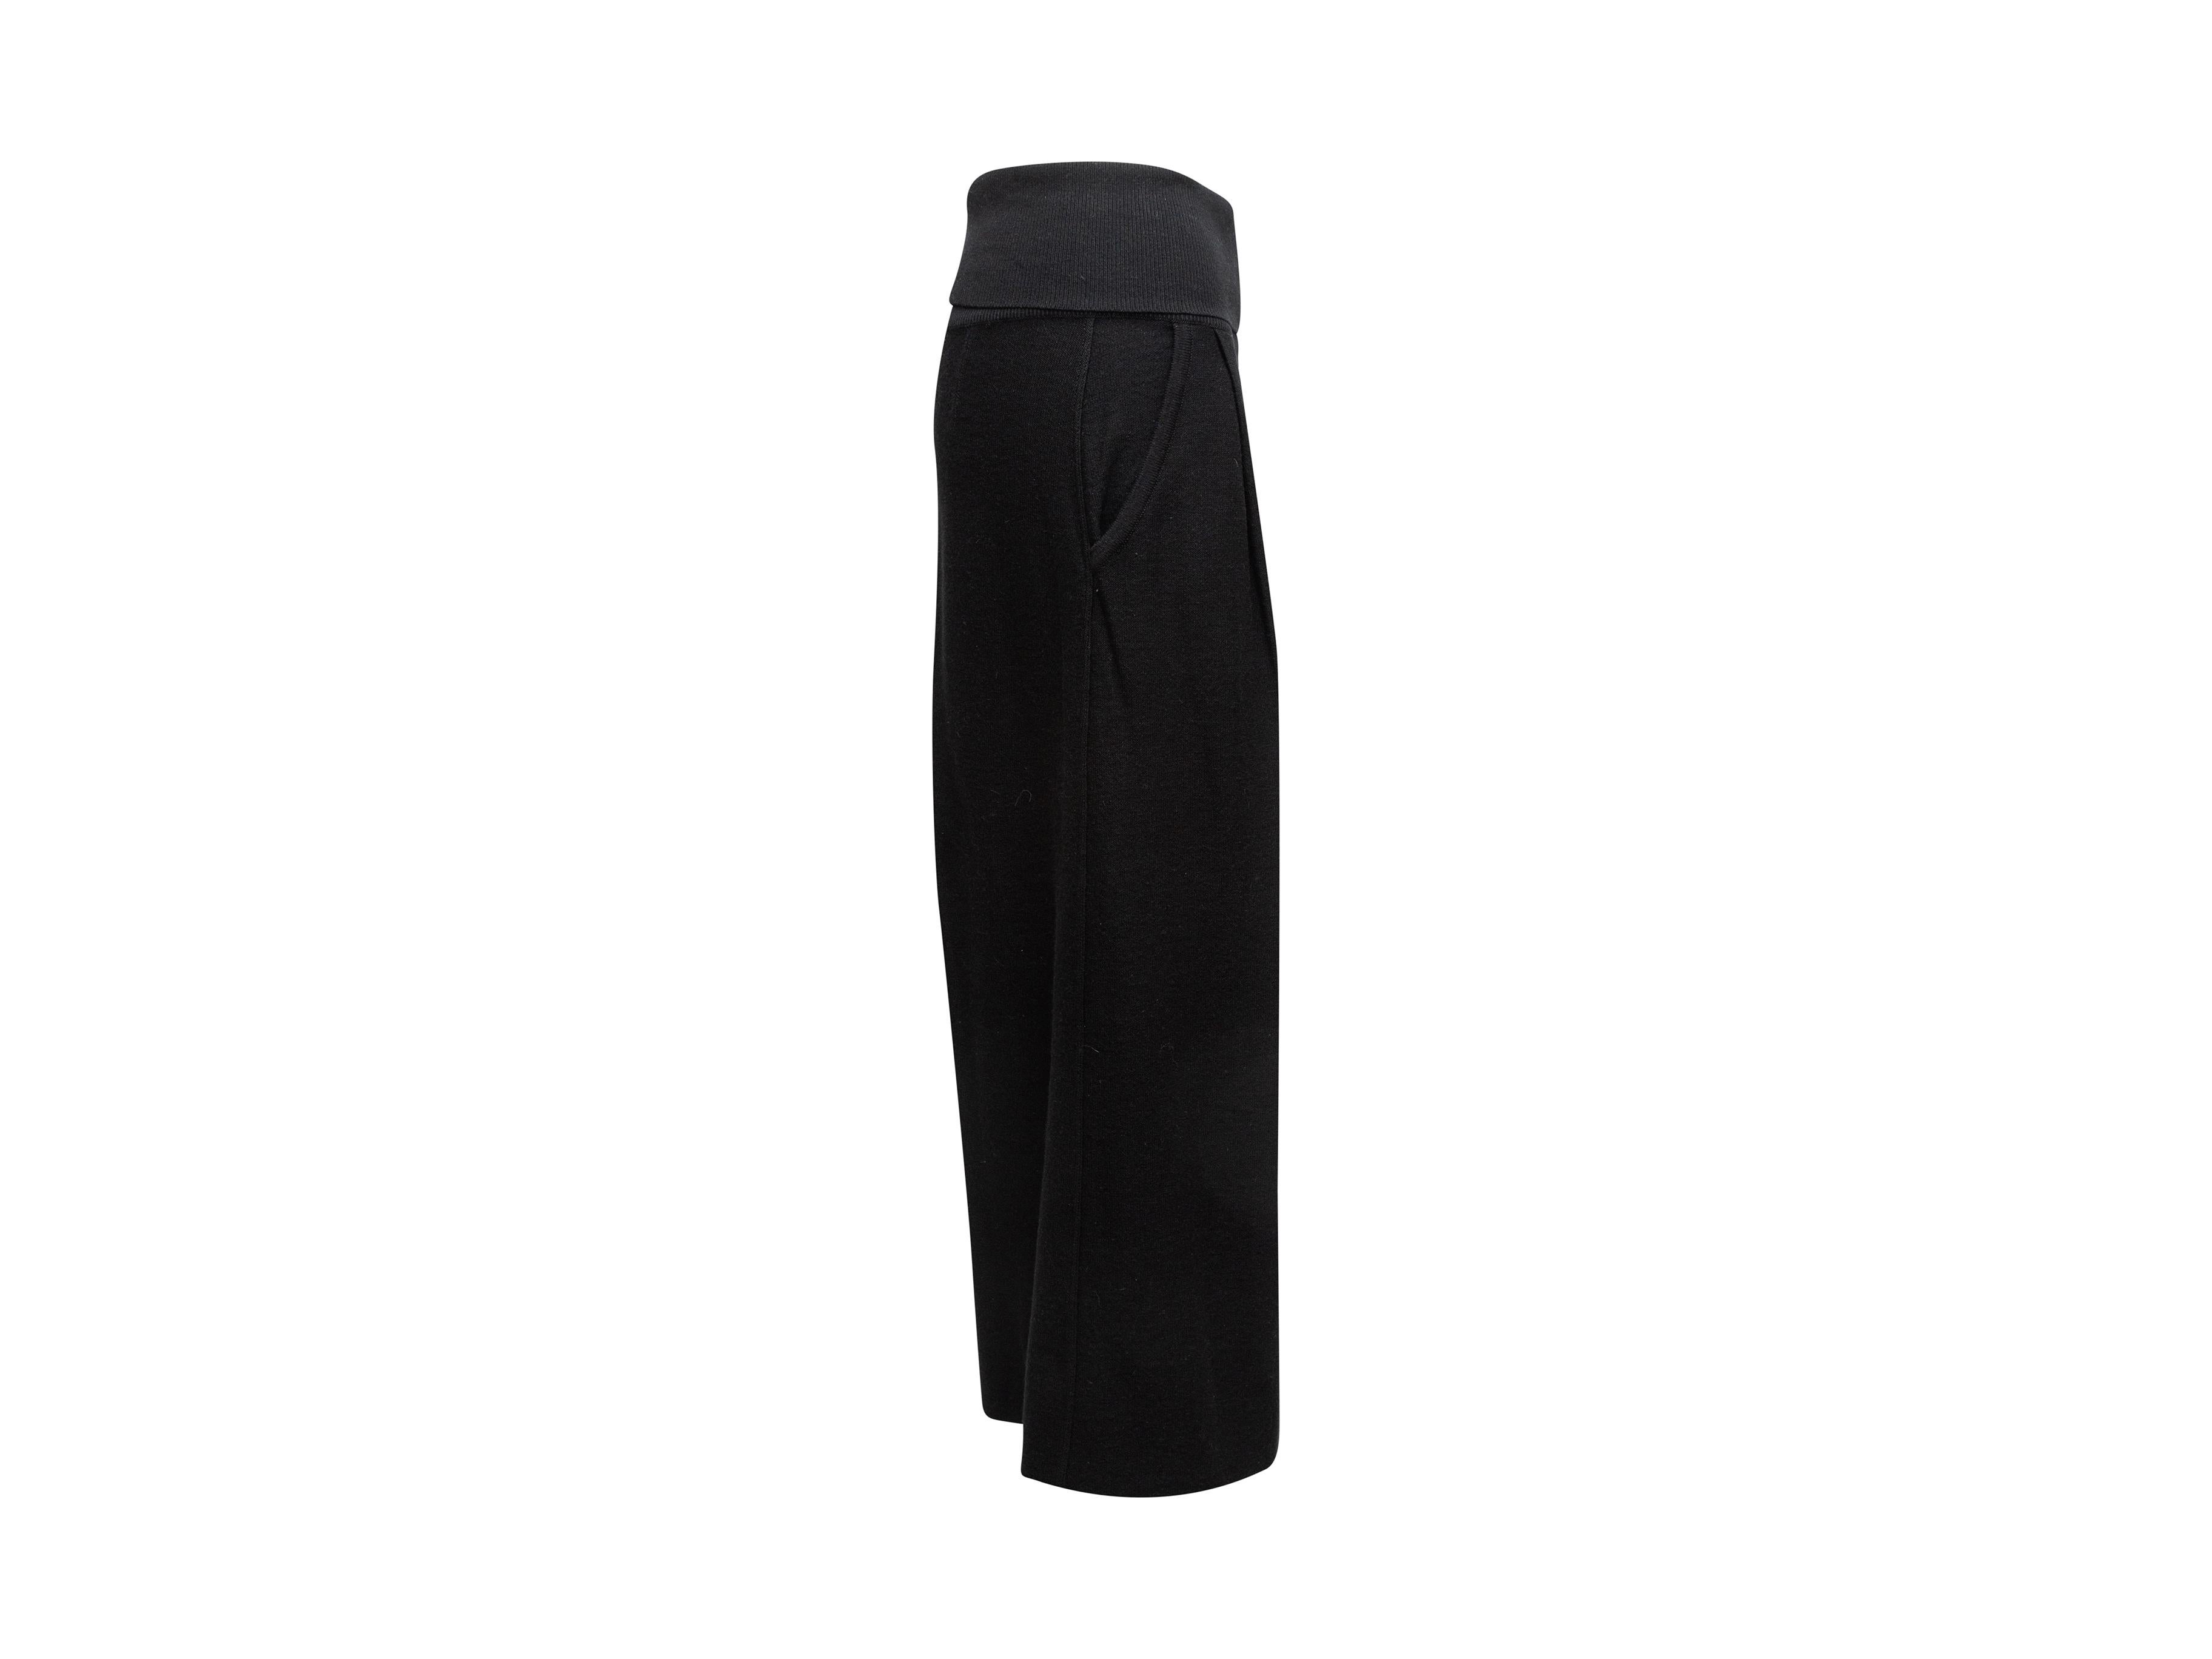 Product details: Black virgin wool and angora culottes by Sonia Rykiel. Dual hip pockets. Designer size 38. 26